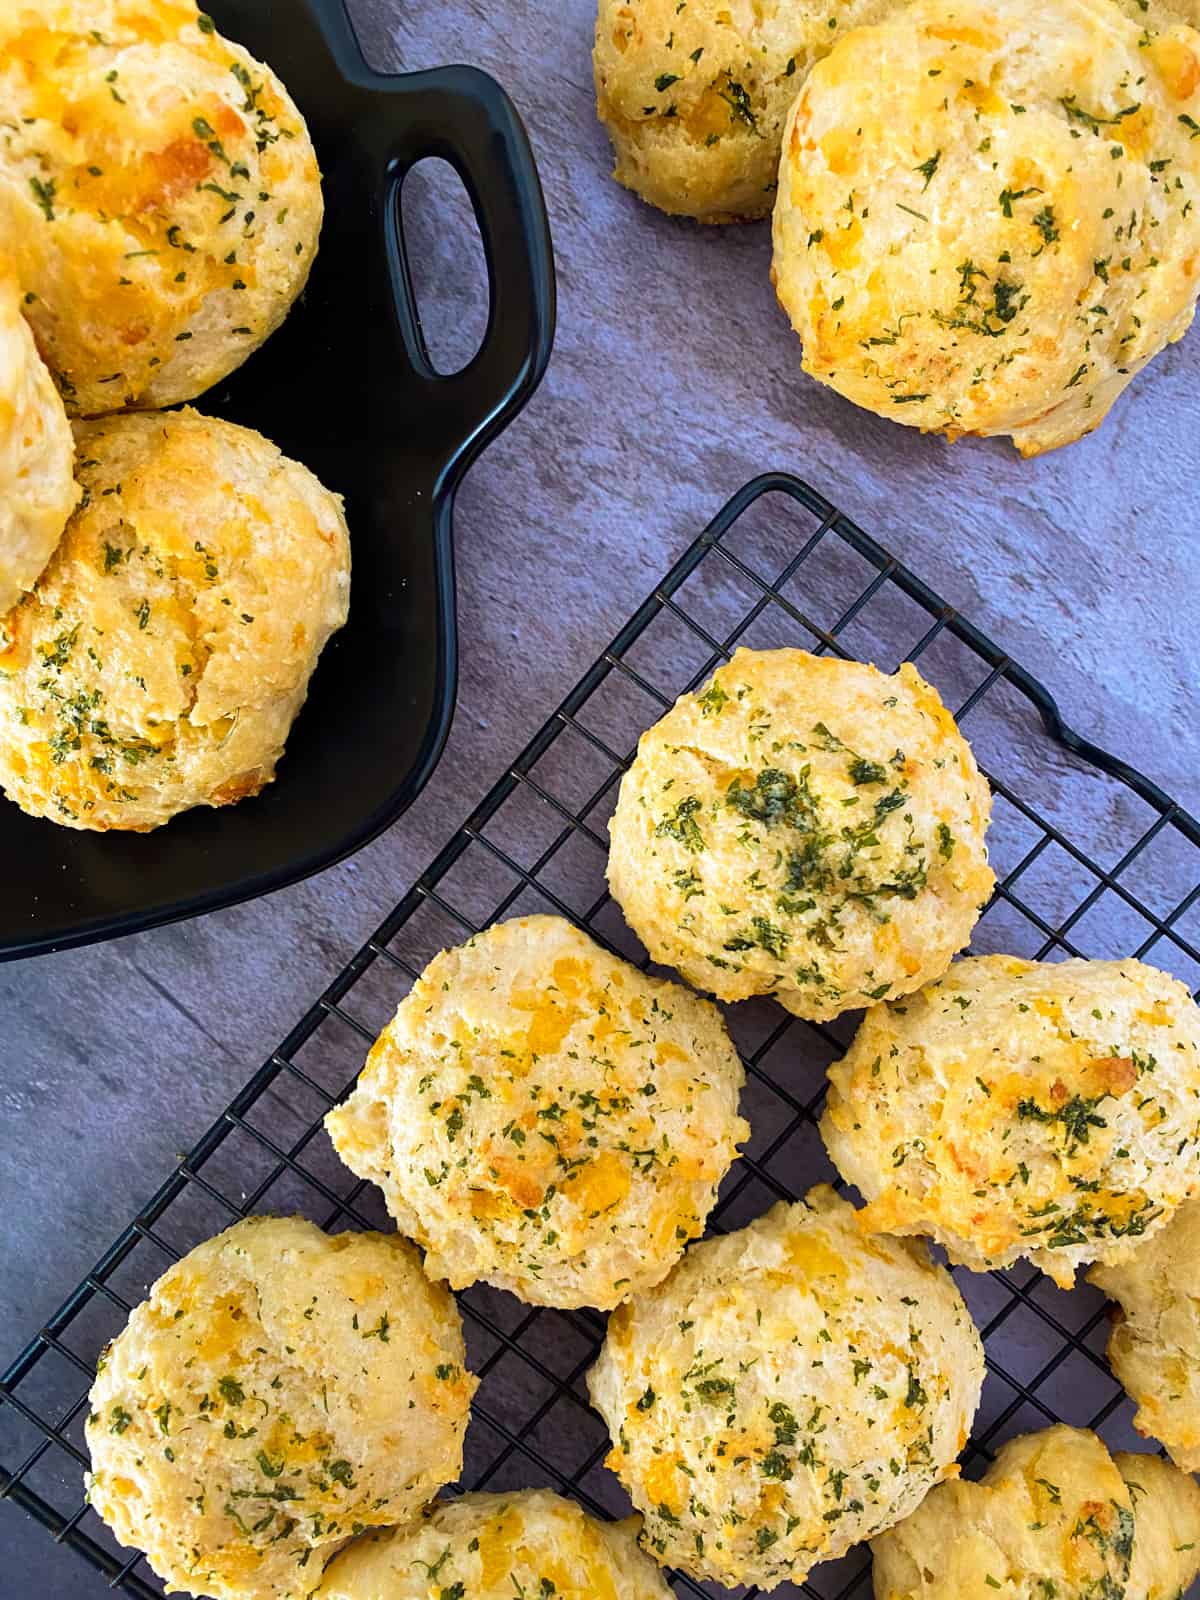 a baking sheet, a plate, and a few extra biscuits on a table